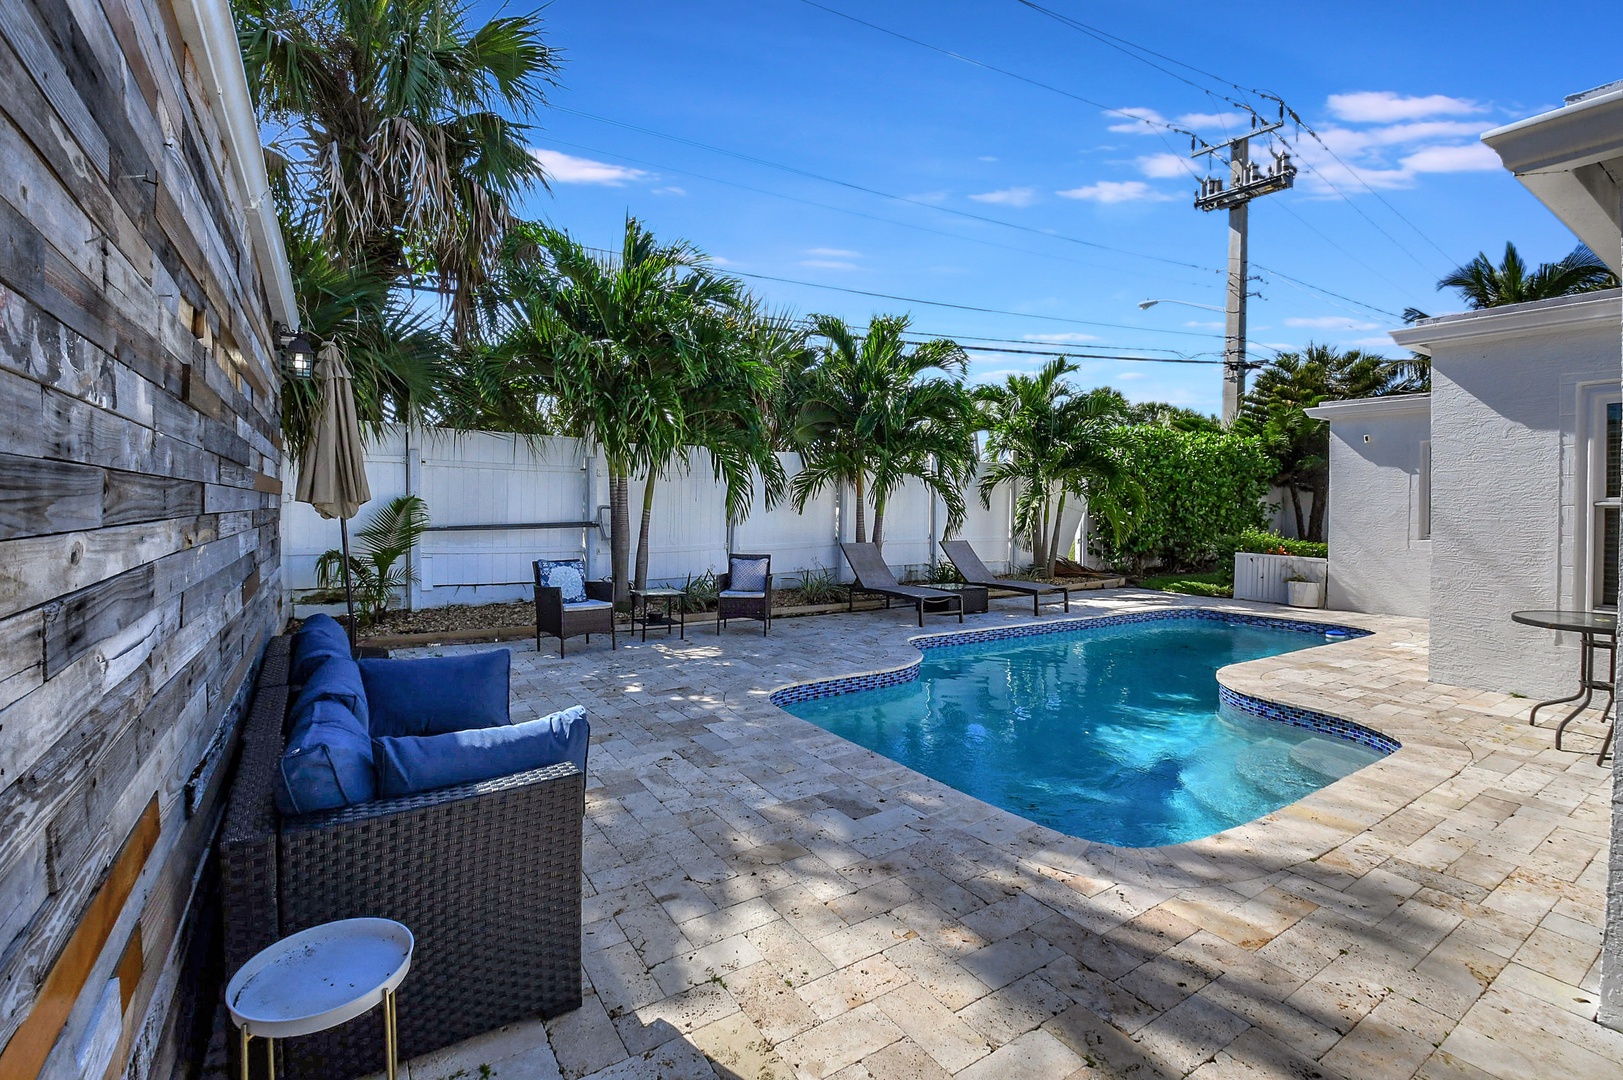 Lounge the day away poolside or make a splash in your own private pool